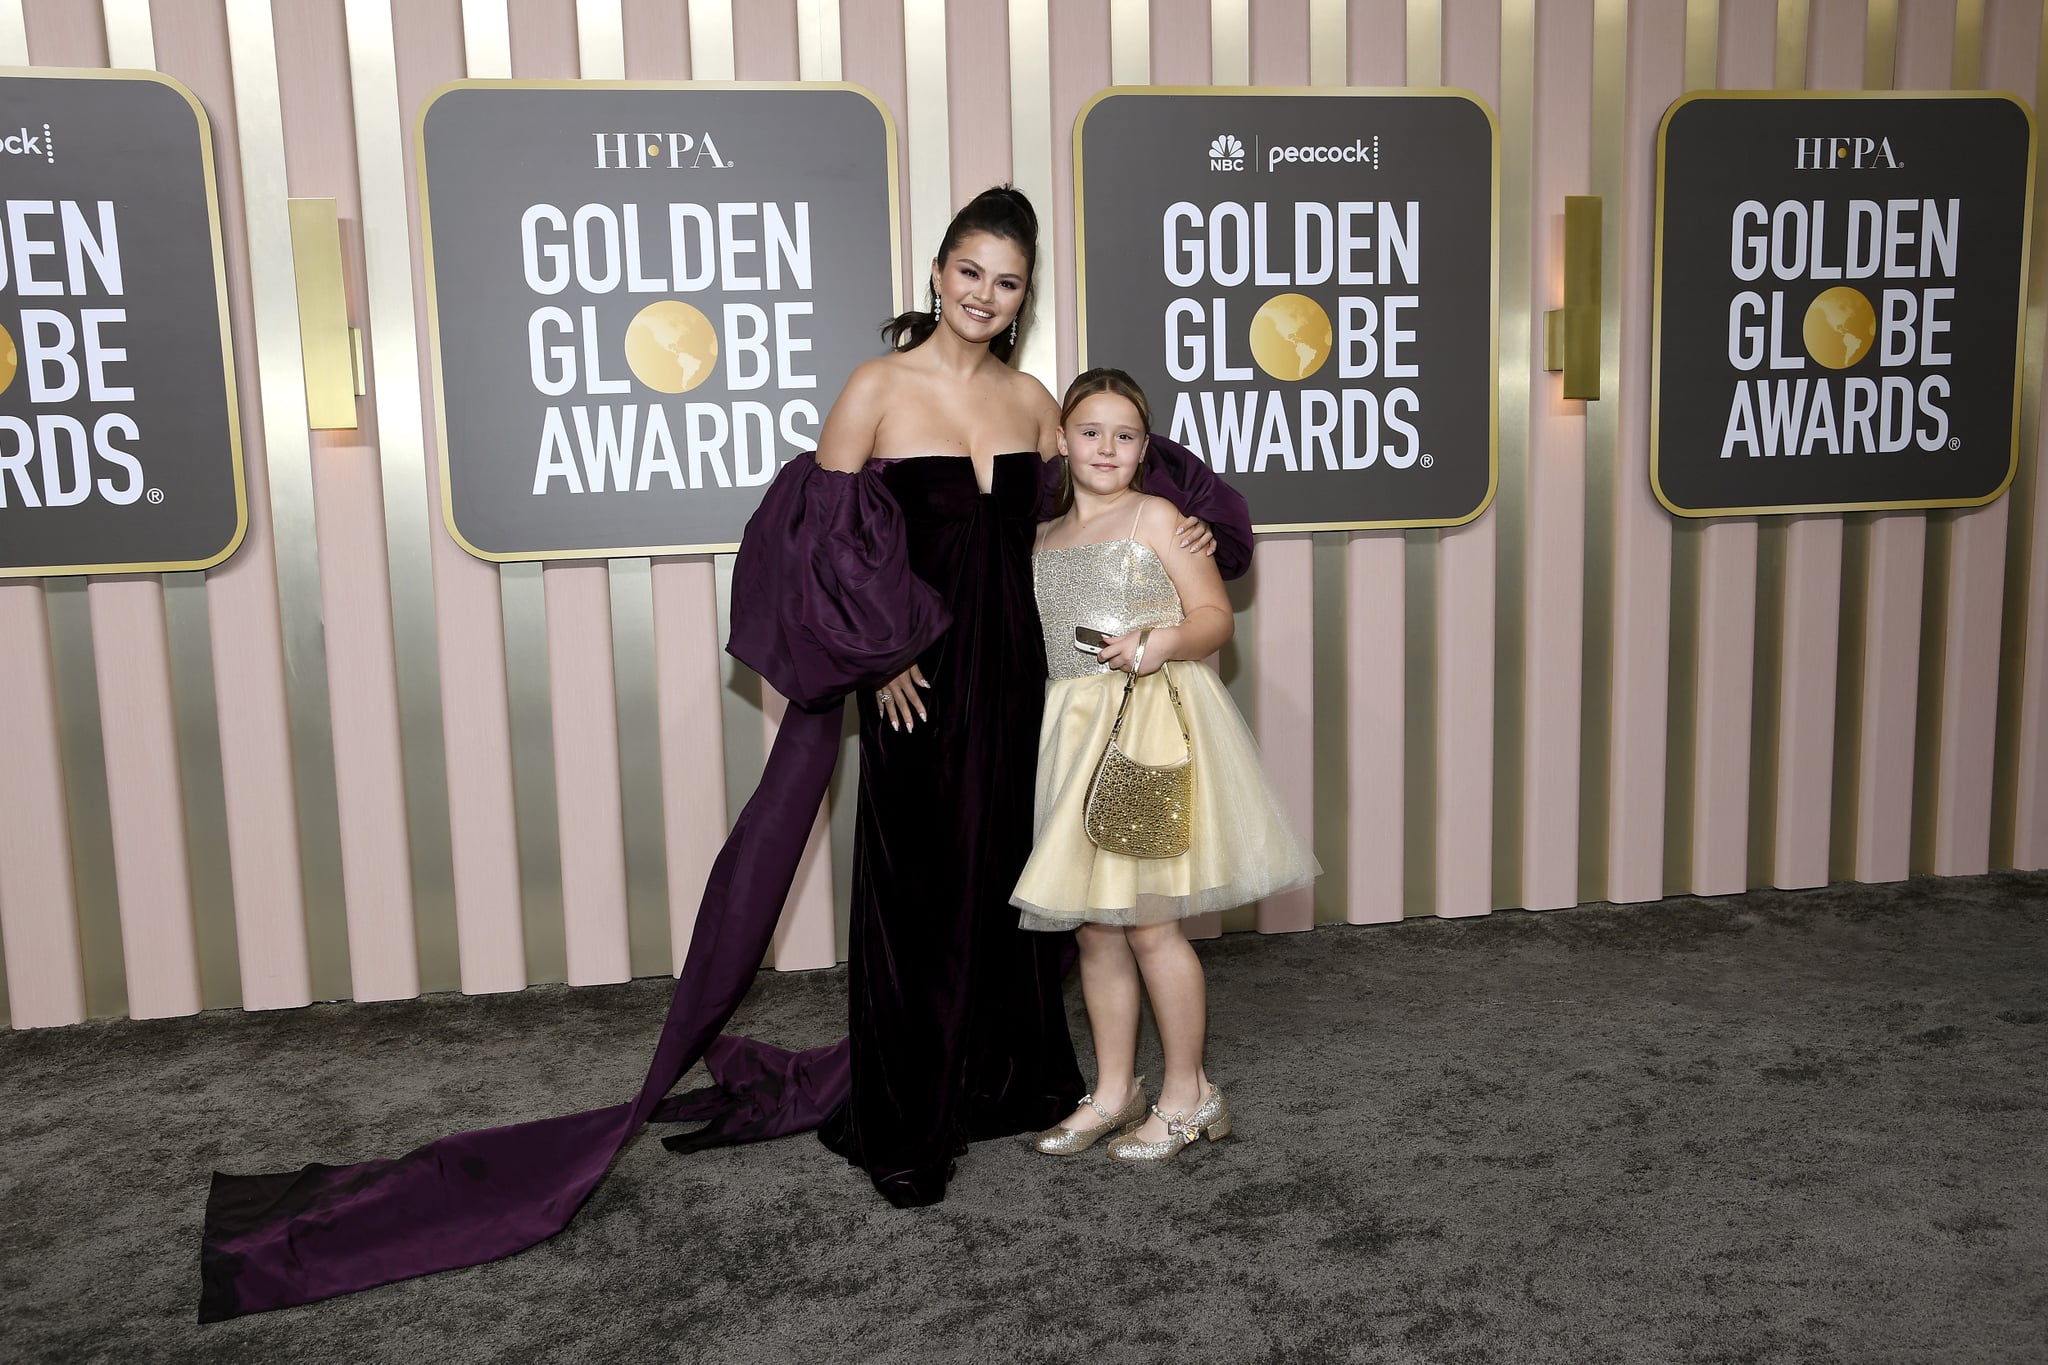 BEVERLY HILLS, CALIFORNIA - JANUARY 10: 80th Annual GOLDEN GLOBE AWARDS -- Pictured: Selena Gomez arrives to the 80th Annual Golden Globe Awards held at the Beverly Hilton Hotel on January 10, 2023 in Beverly Hills, California. --  (Photo by Kevork Djansezian/NBC via Getty Images)